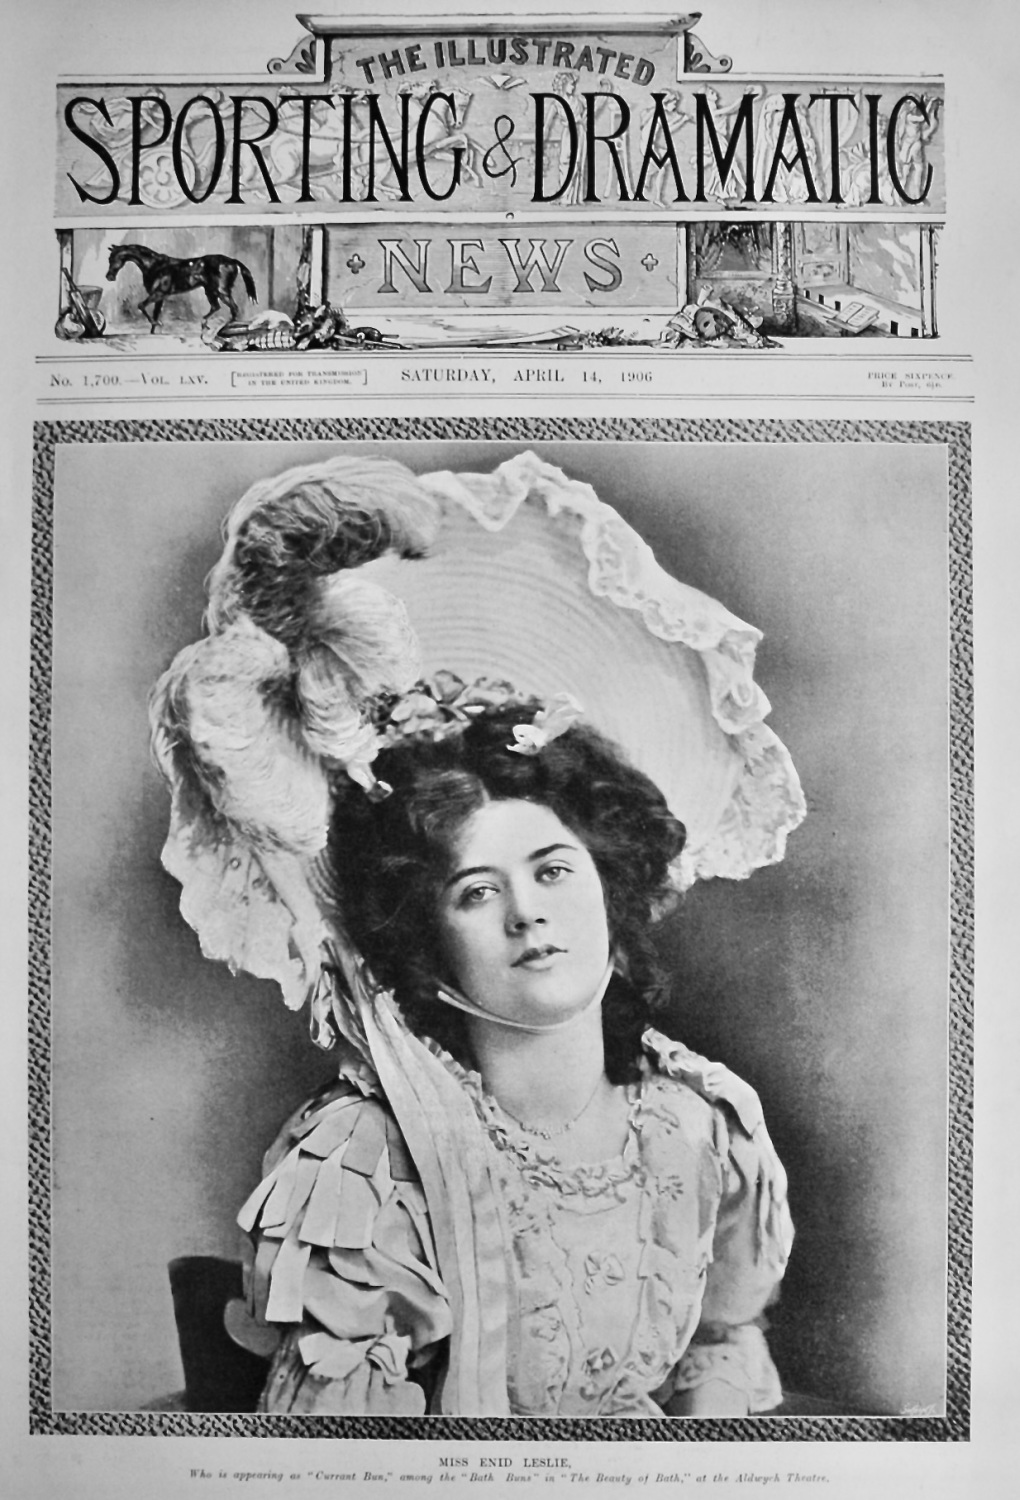 Miss Enid Leslie, who is appearing as 